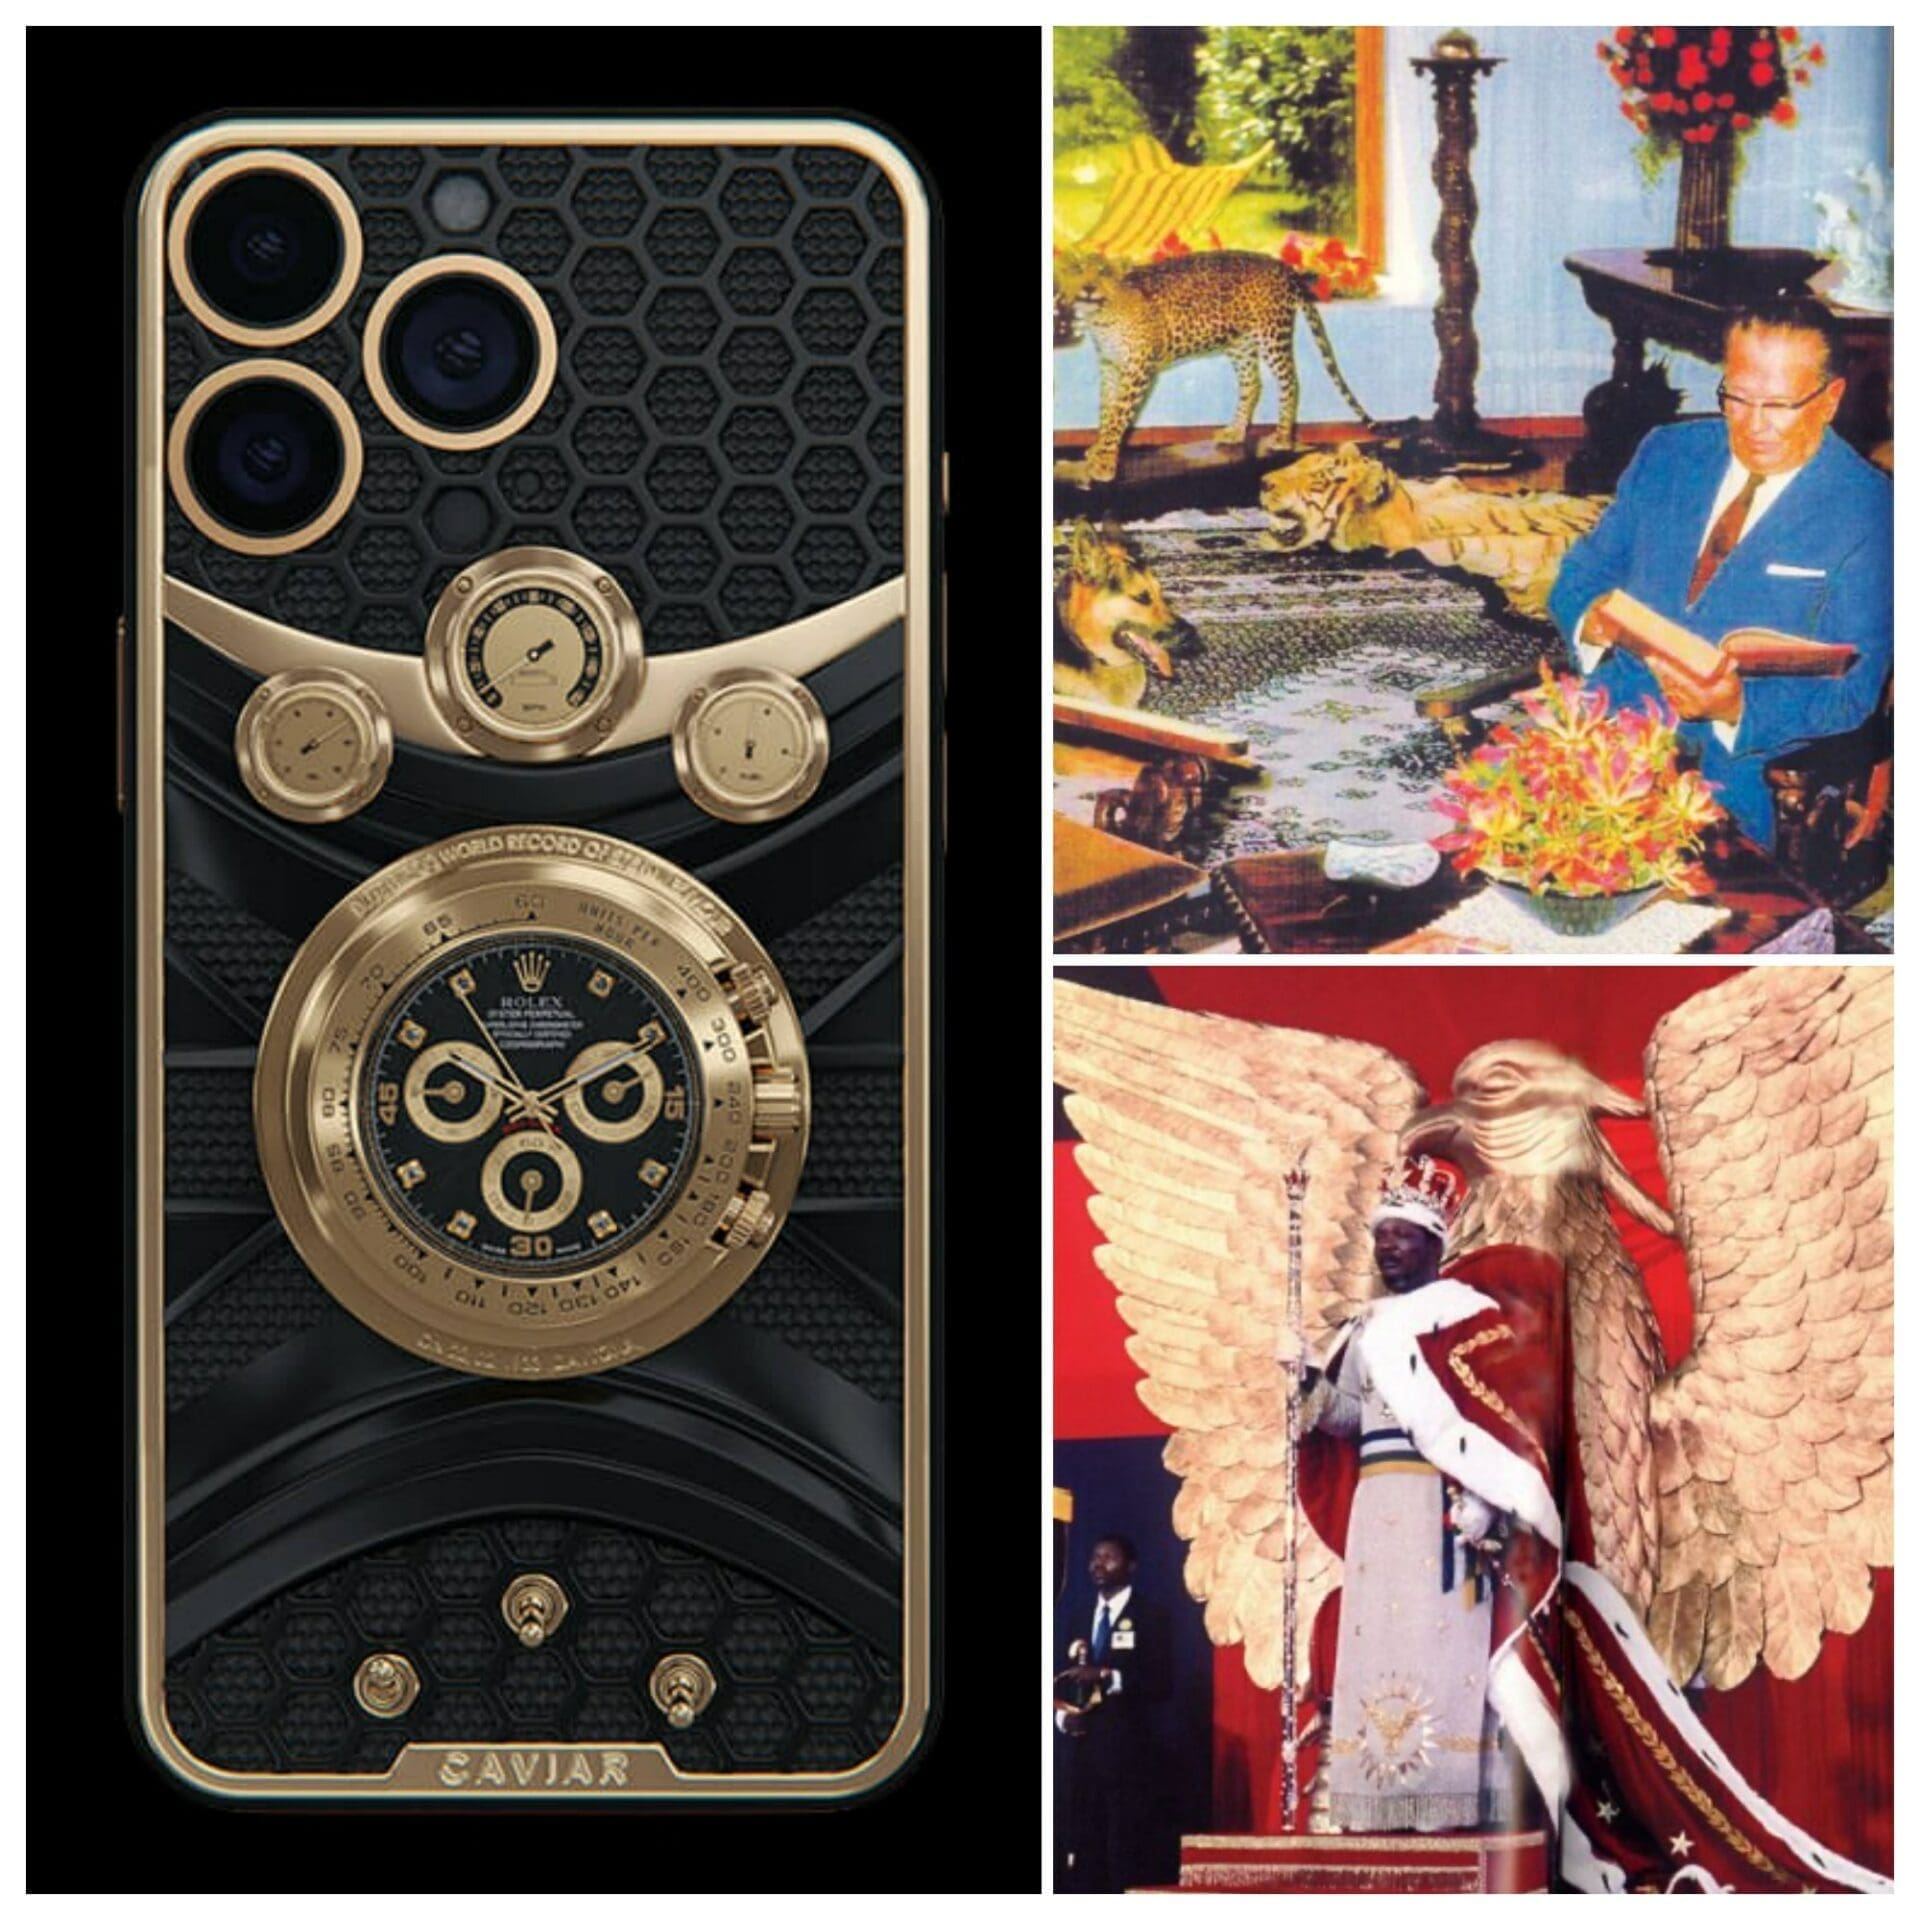 Modified with the dial of a Rolex Daytona, this iPhone is the ideal gift for a lunatic despot. Here’s why…